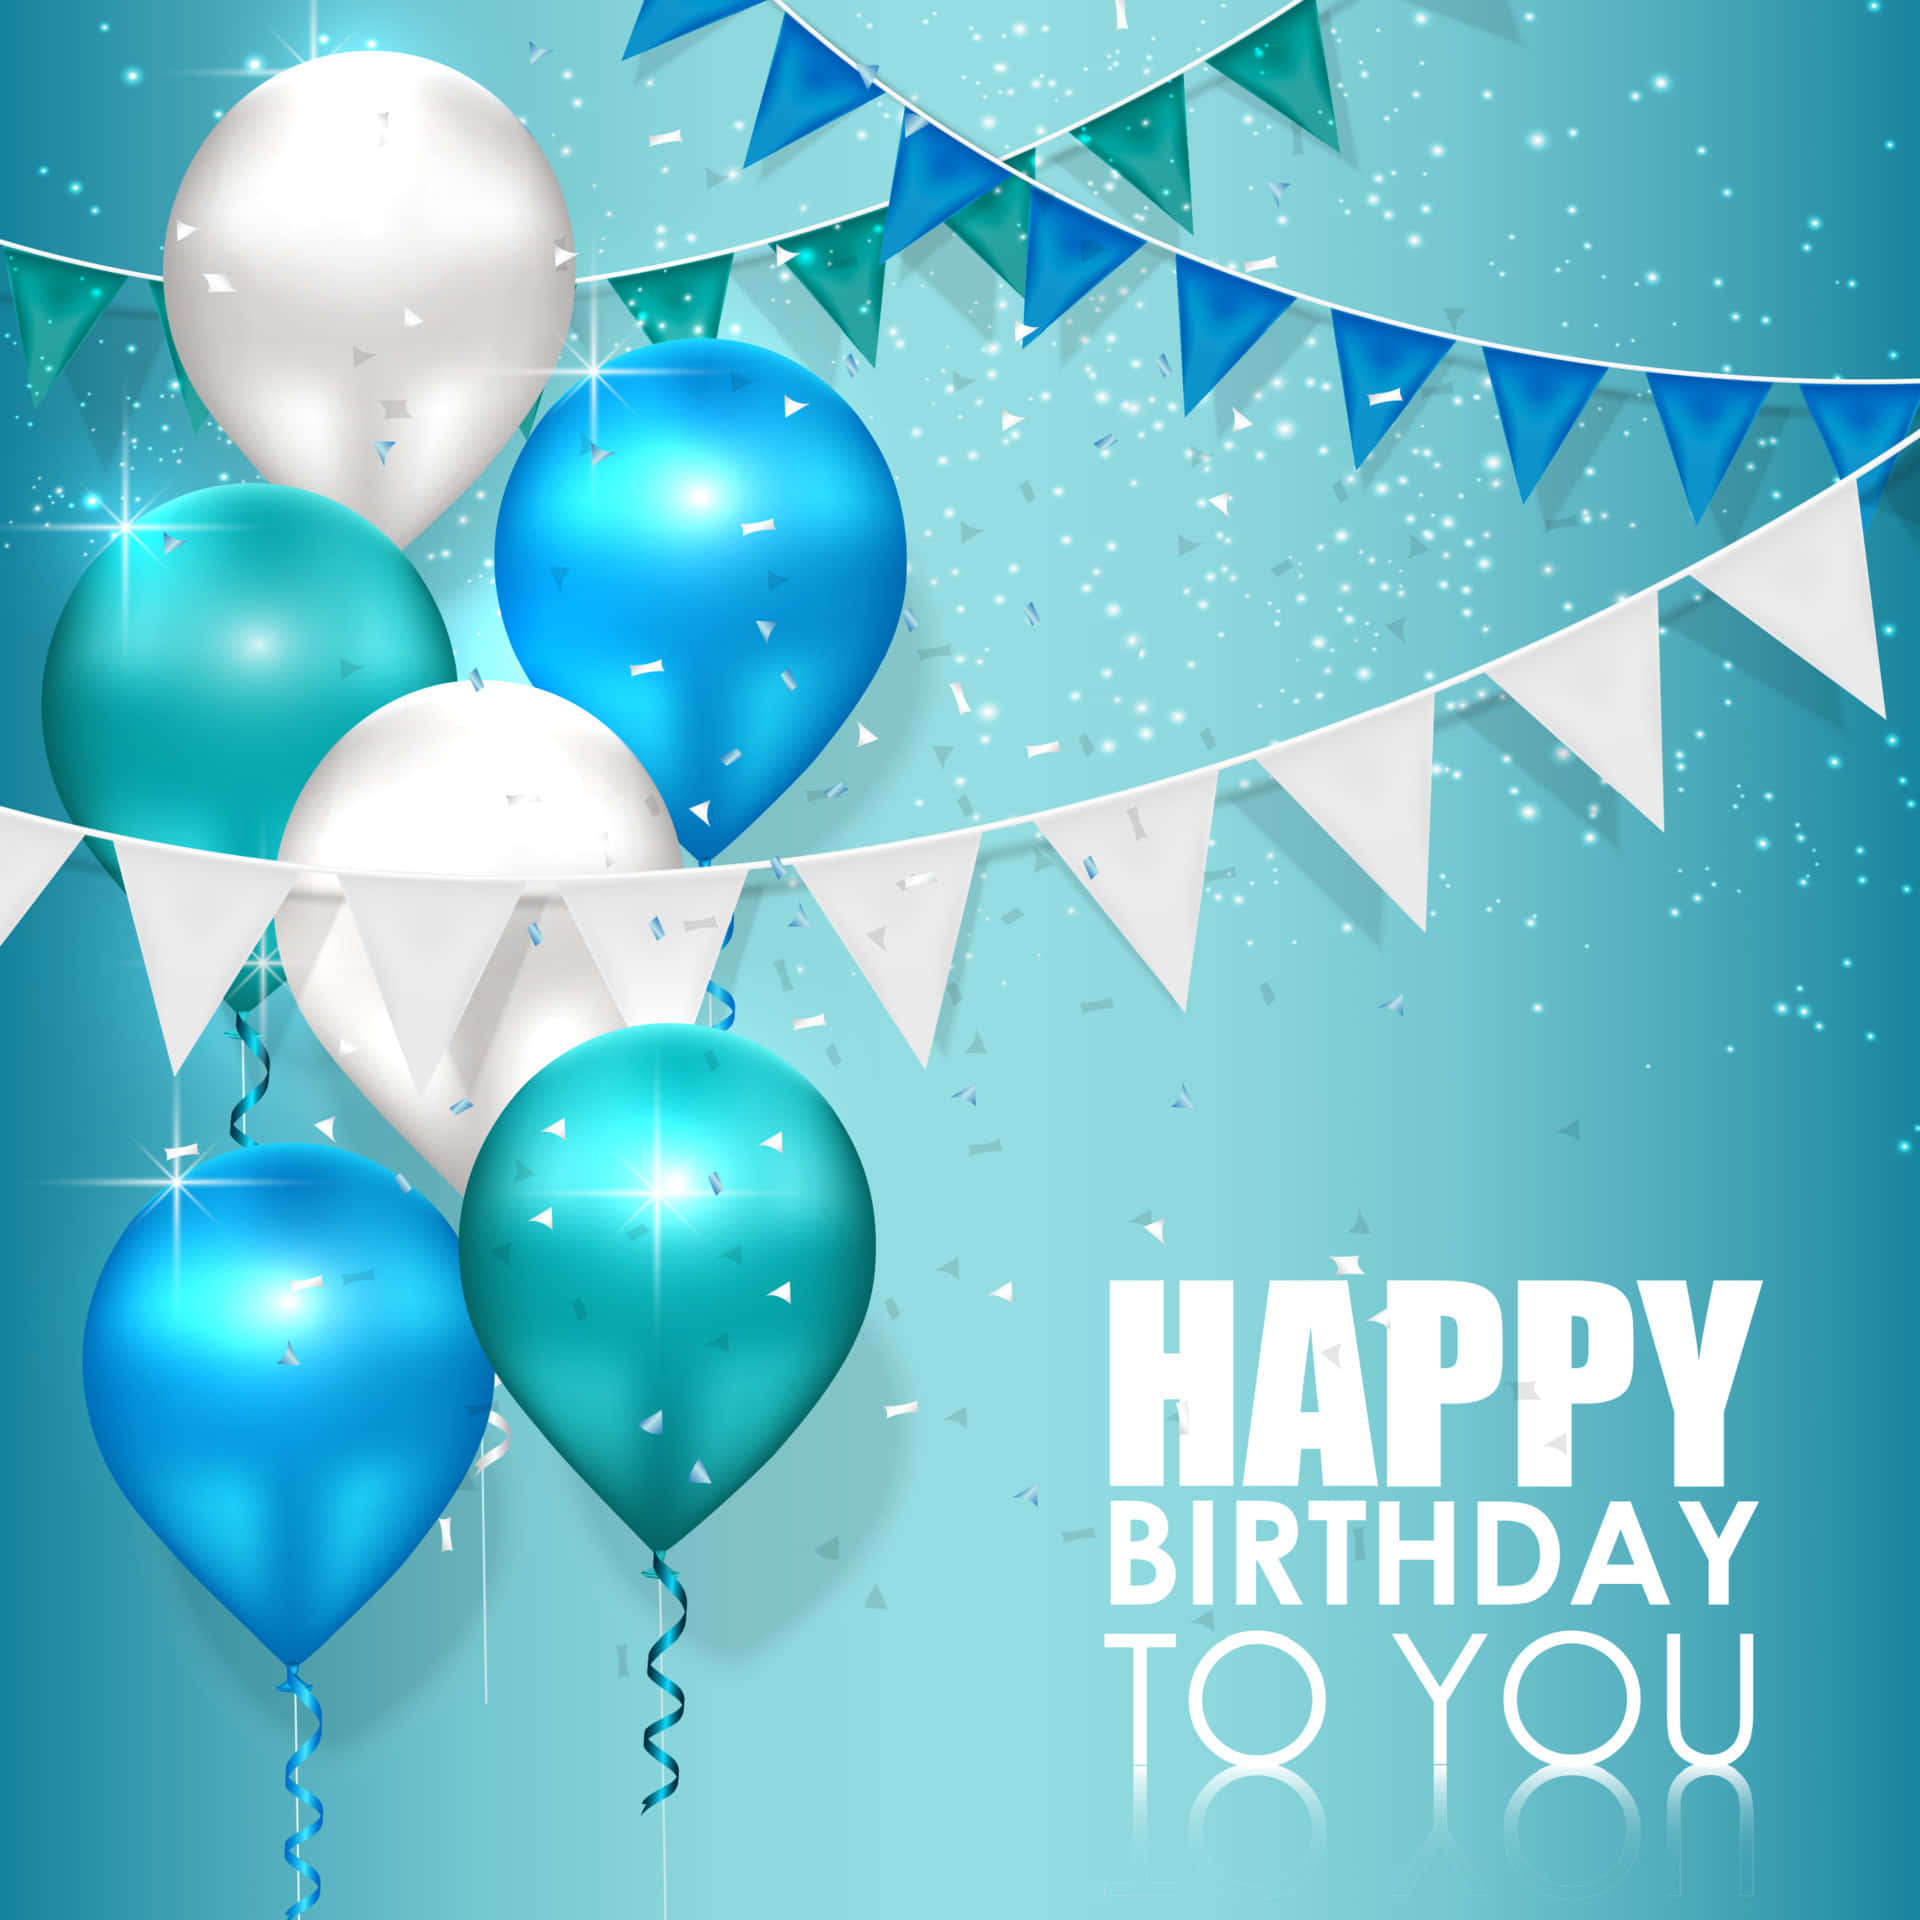 Happy Birthday To You With Blue And White Balloons